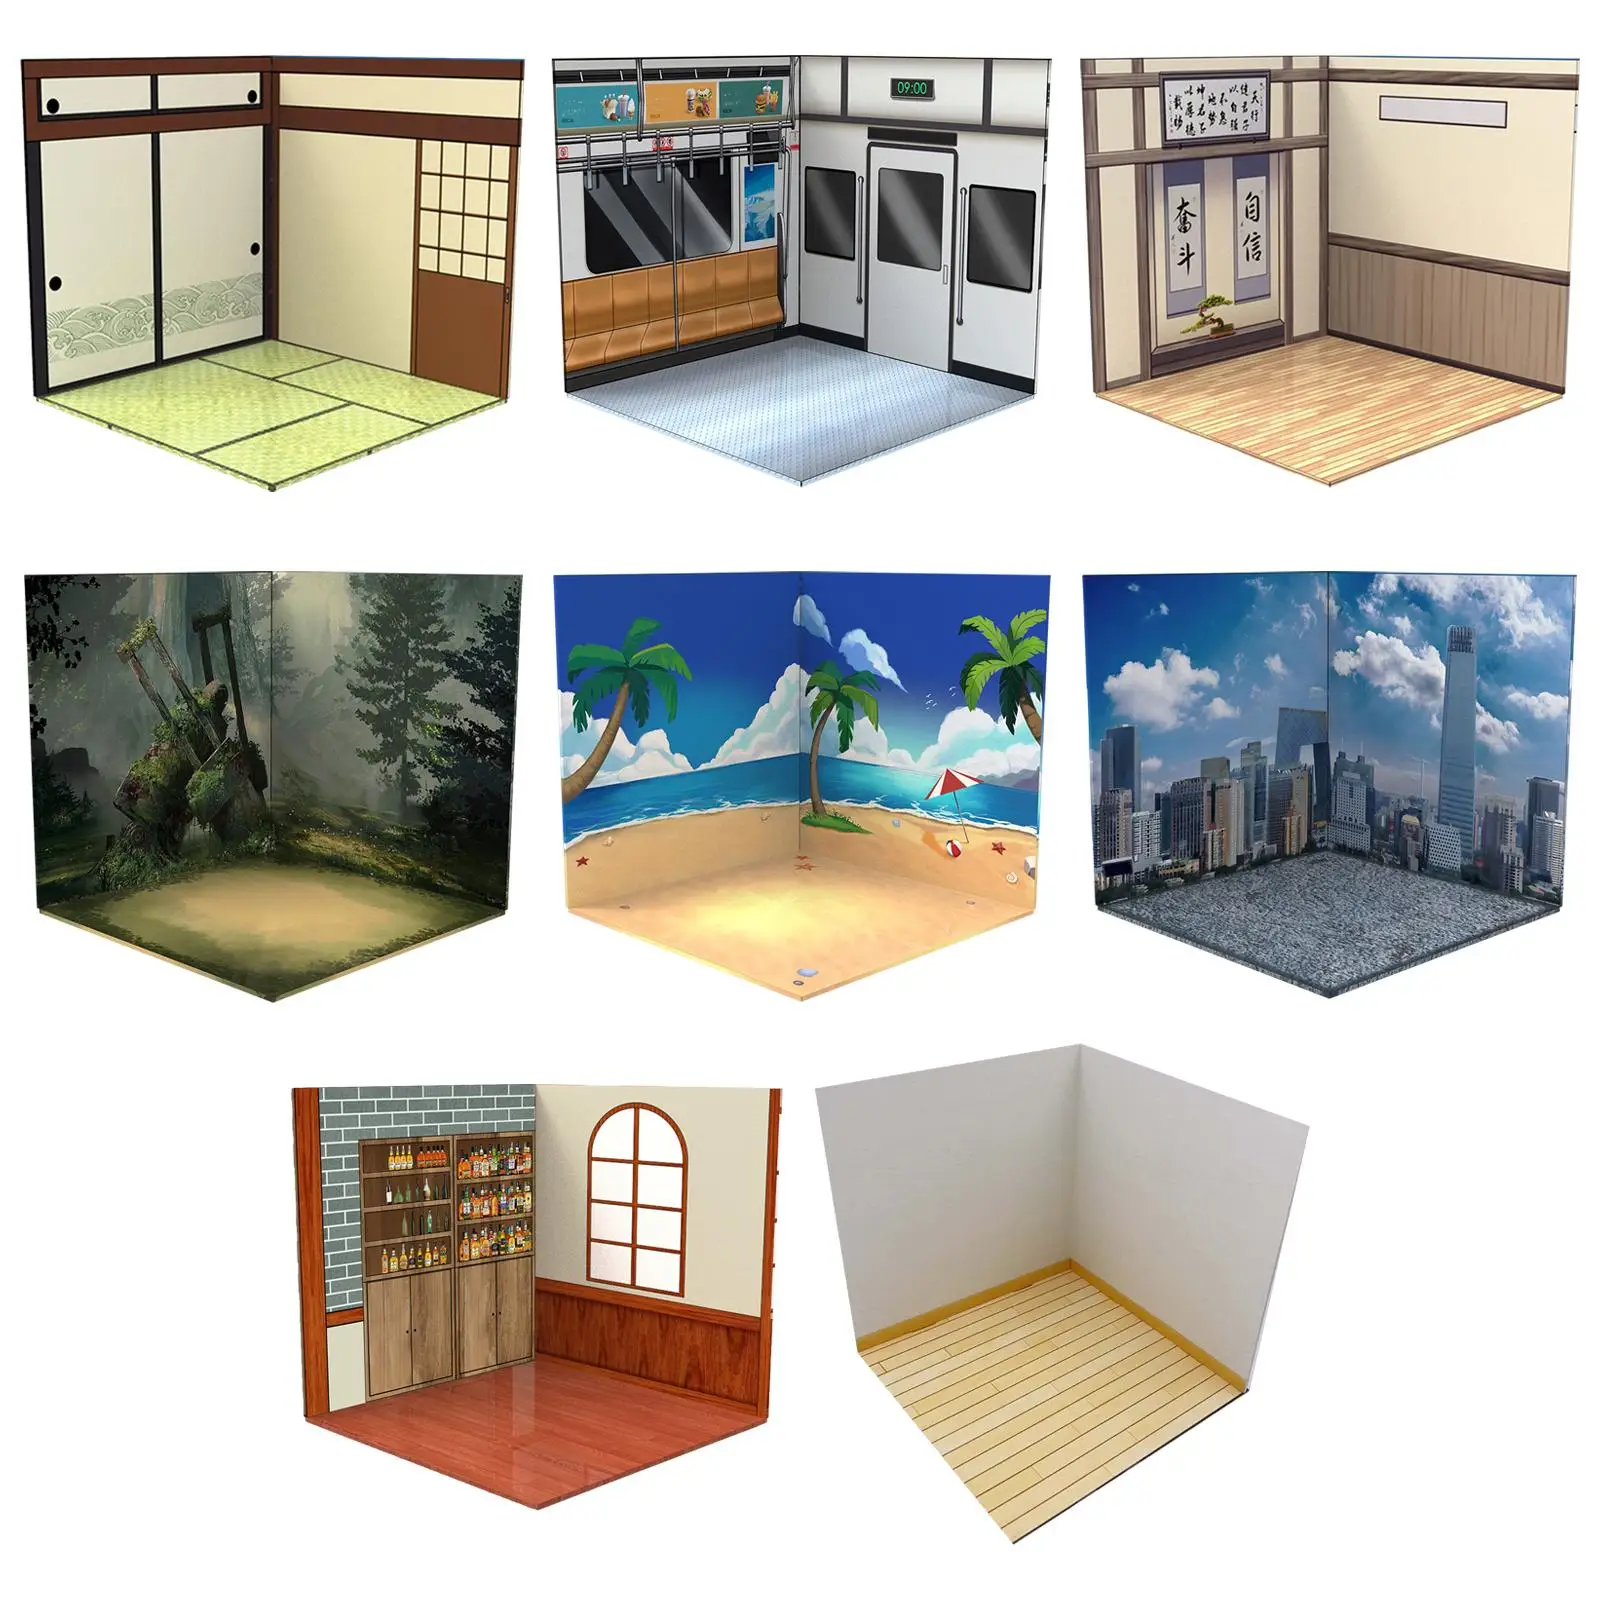 1/12 Backdrop Show Collection Organizer Display for Action Figures Dolls